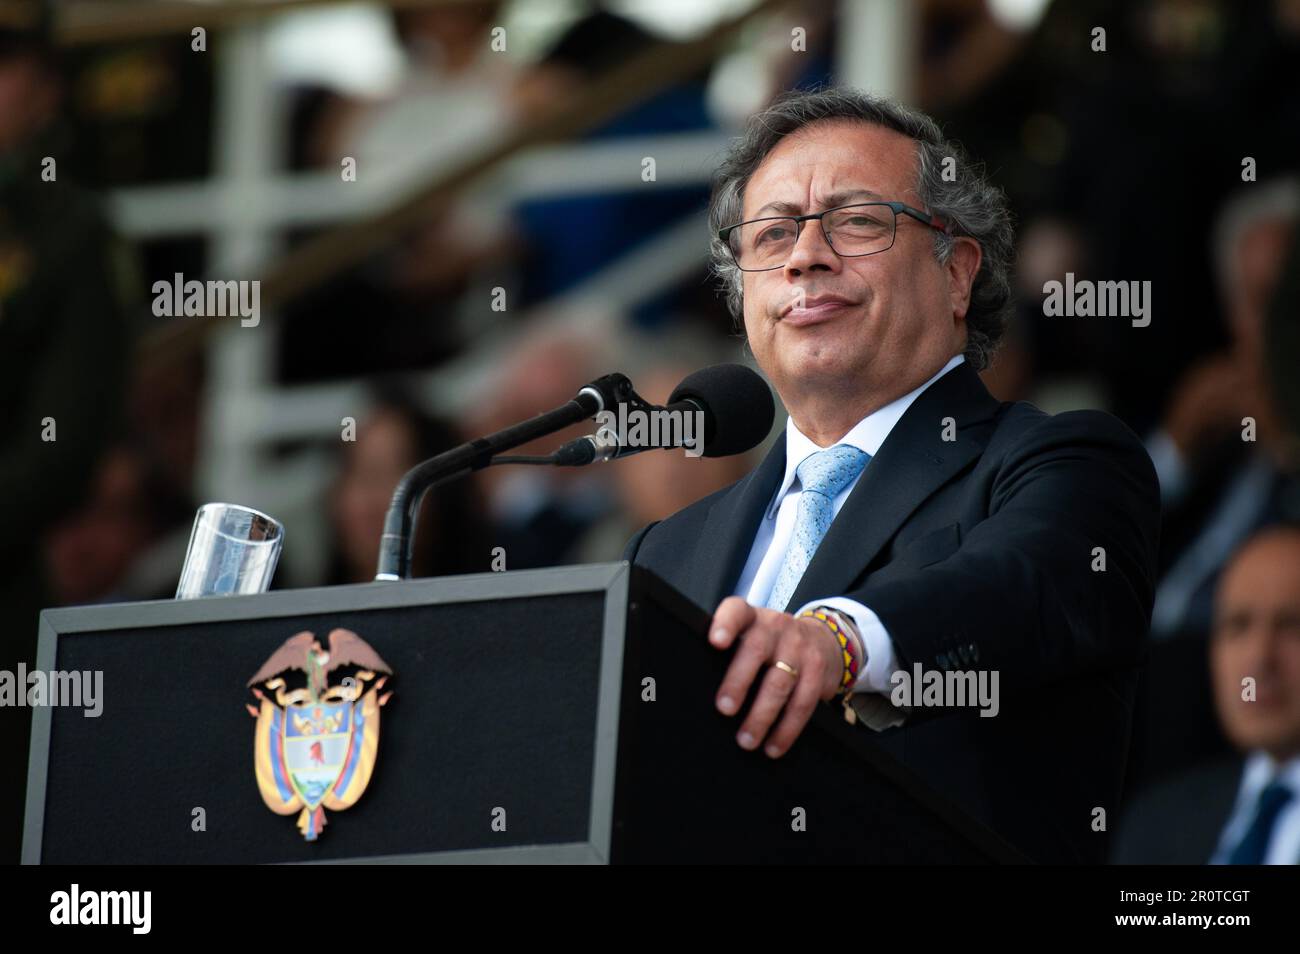 Bogota, Colombia. 09th May, 2023. Colombia's president Gustavo Petro gives a speach during the ceremony of the new Colombian Police Director William Rene Salamanca at the General Santander Police Academy in Bogota, Colombia. May 9, 2023. Photo by: Chepa Beltran/Long Visual Press Credit: Long Visual Press/Alamy Live News Stock Photo